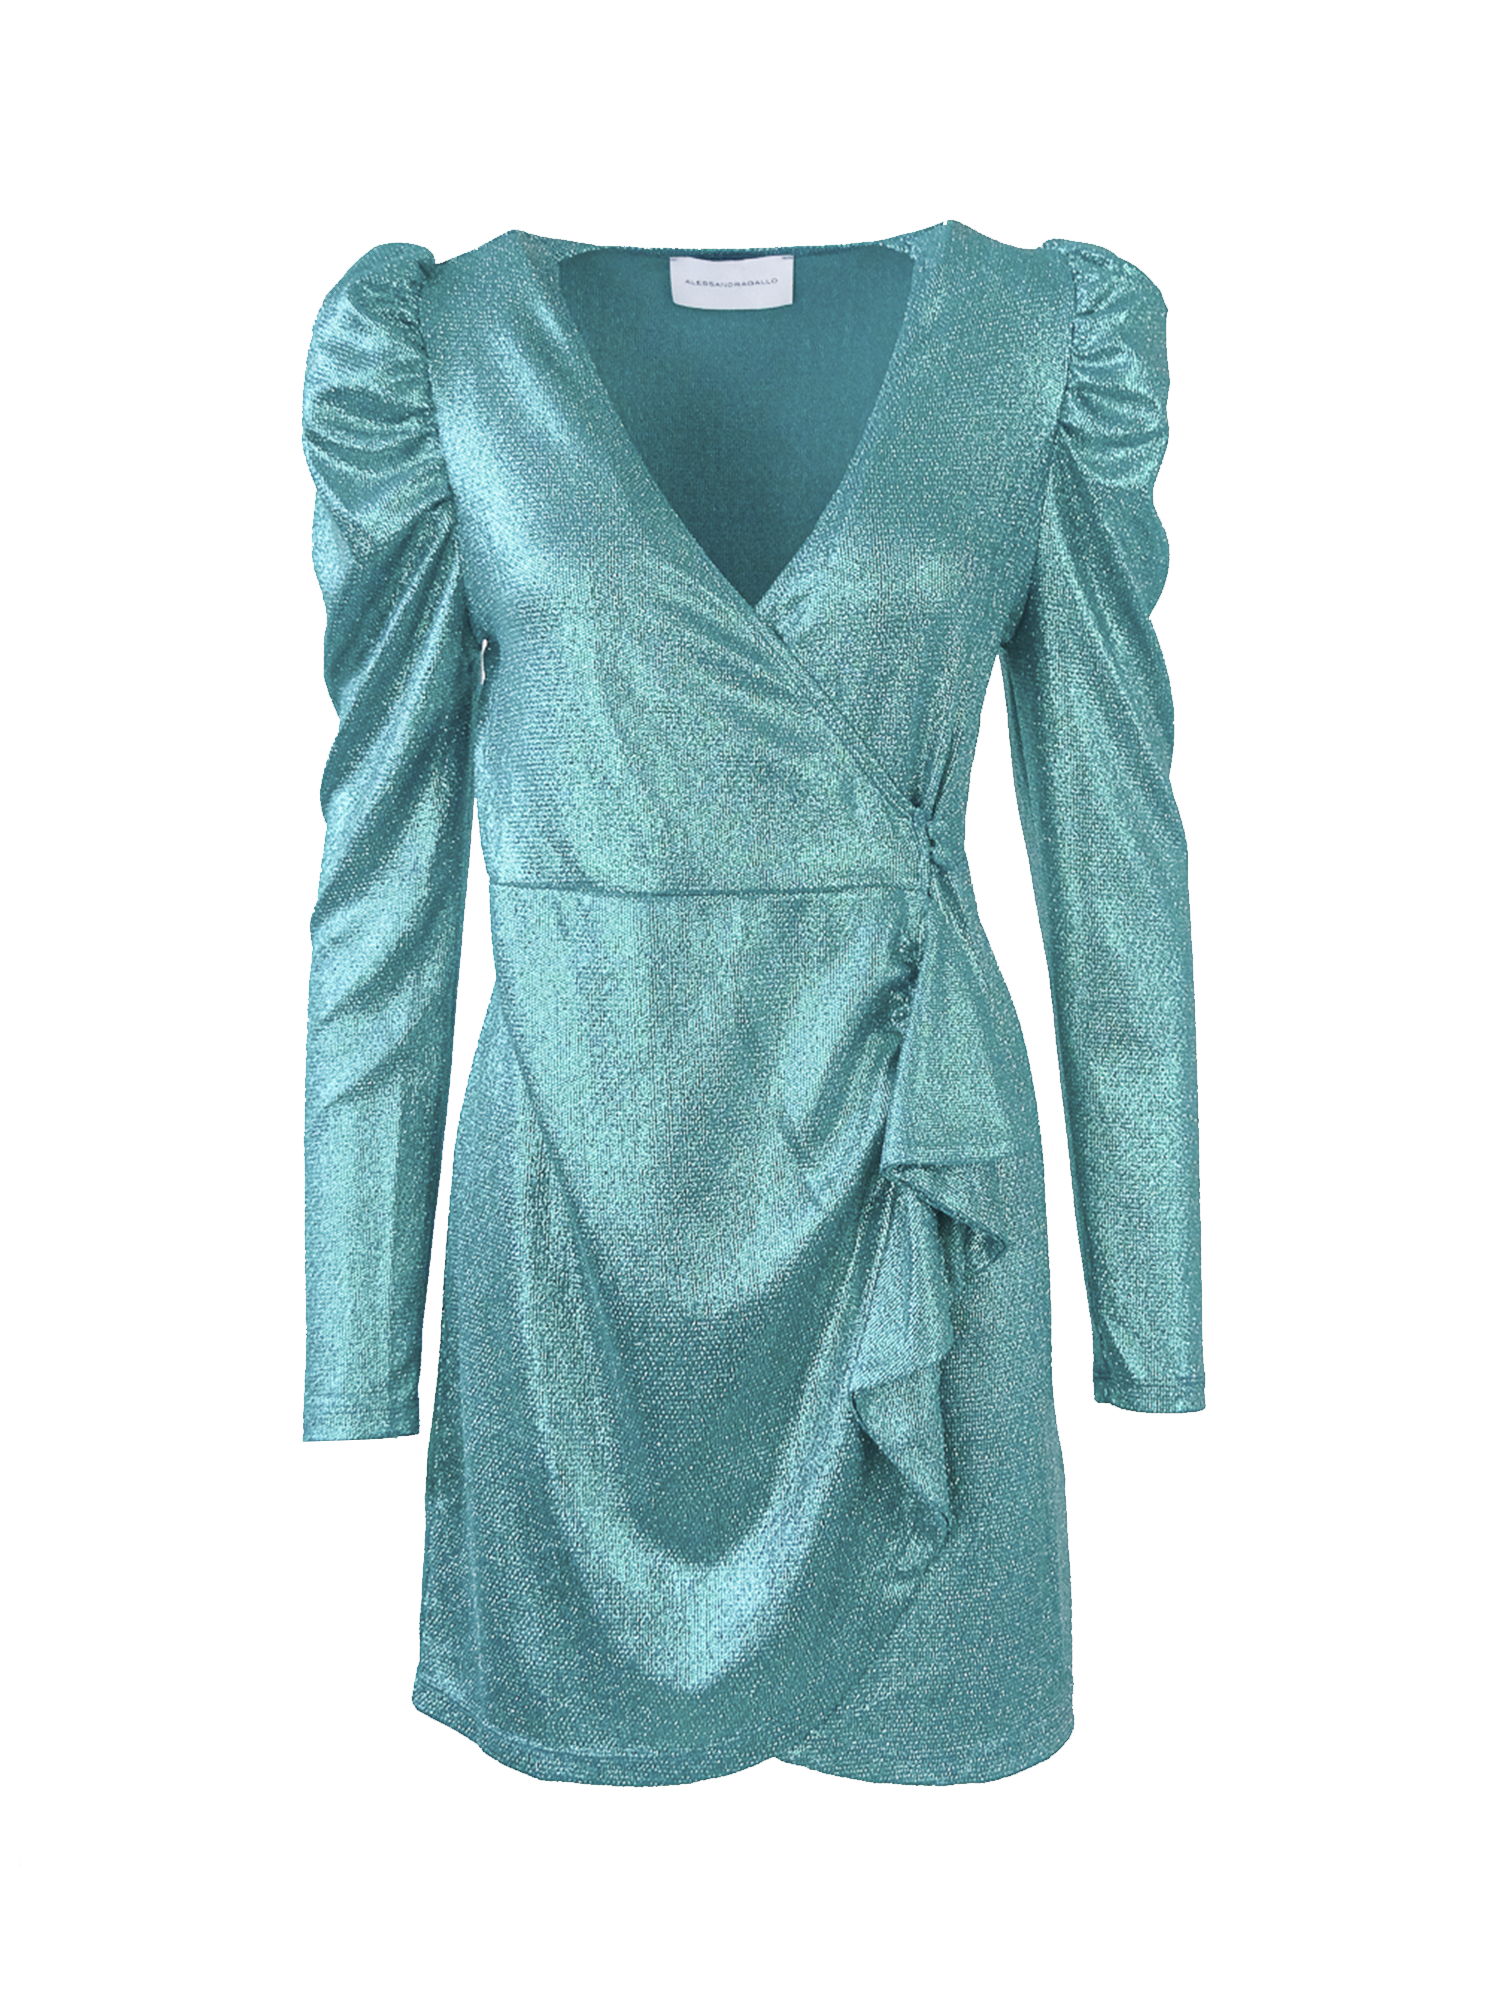 EMMA - dress with long puff sleeve in green lurex